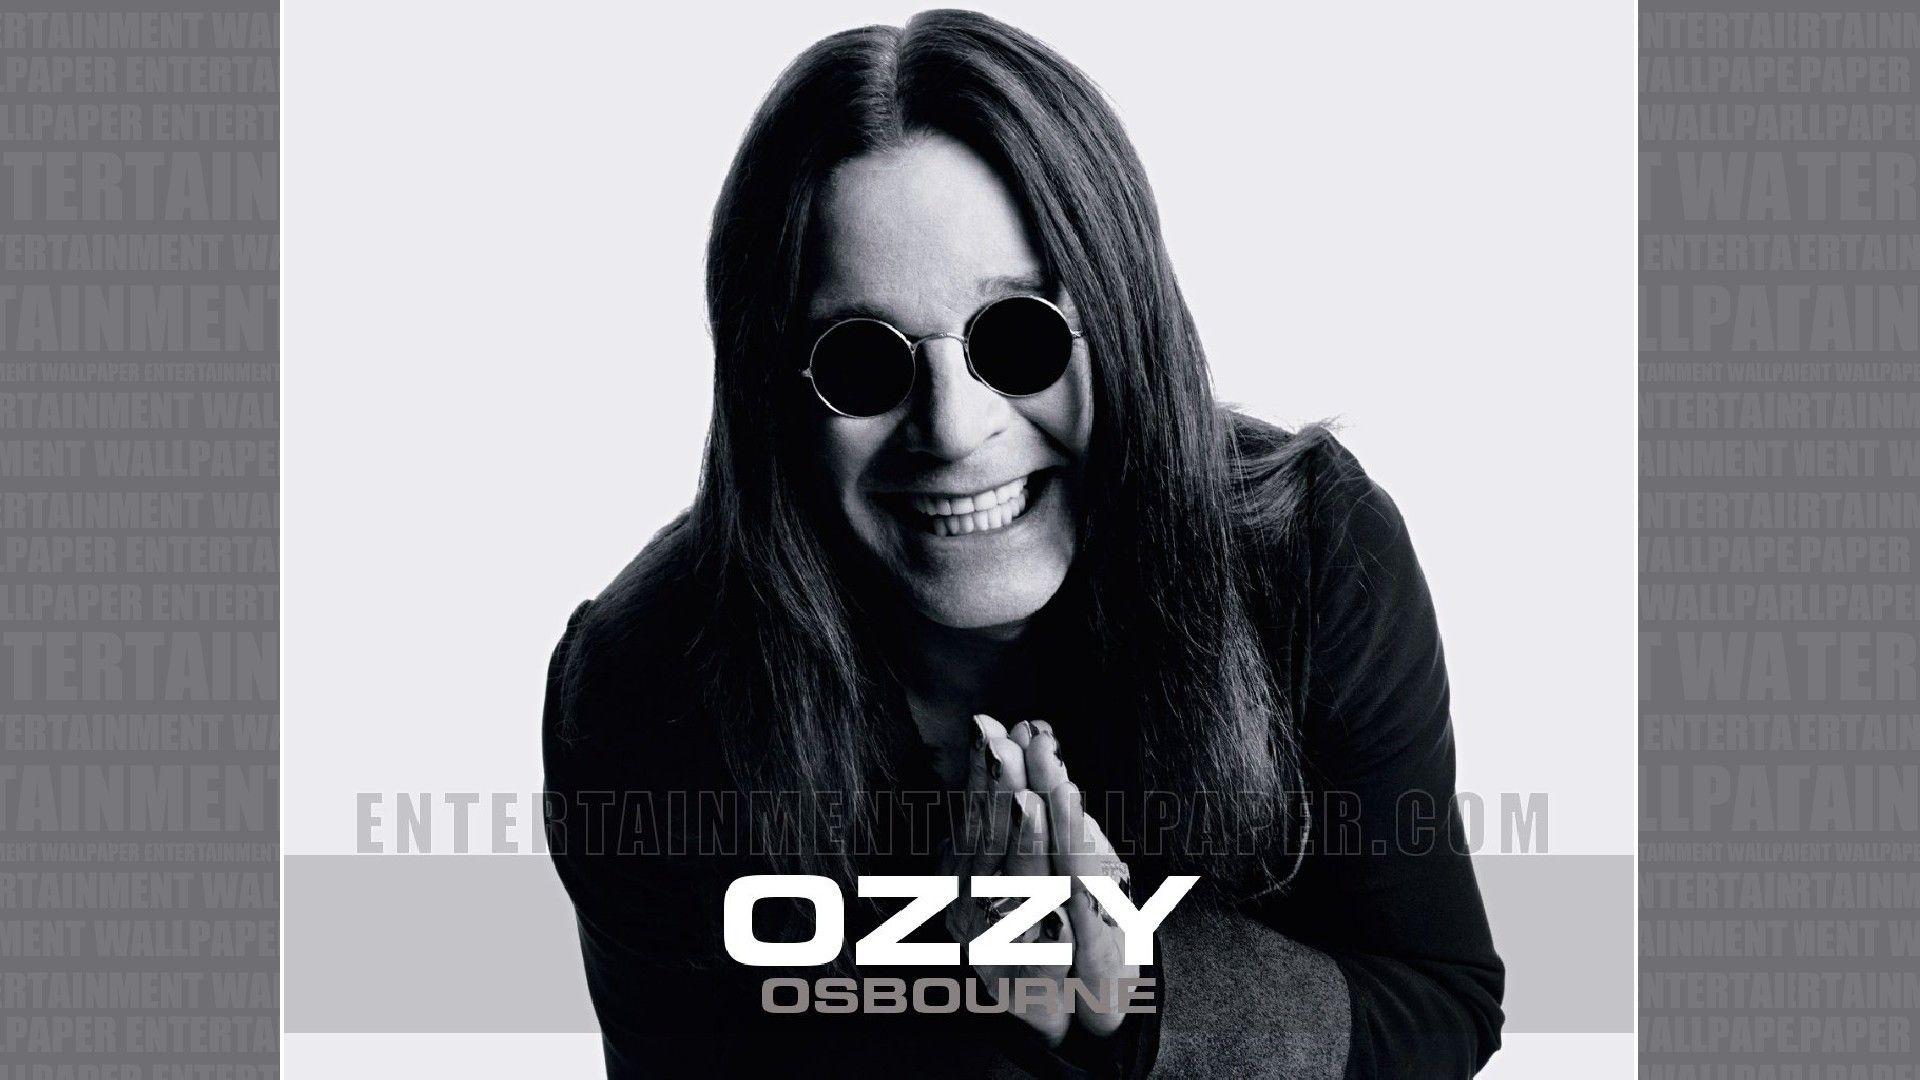 Heres an ozzy poster and a mobile wallpaper done by me  rblacksabbath